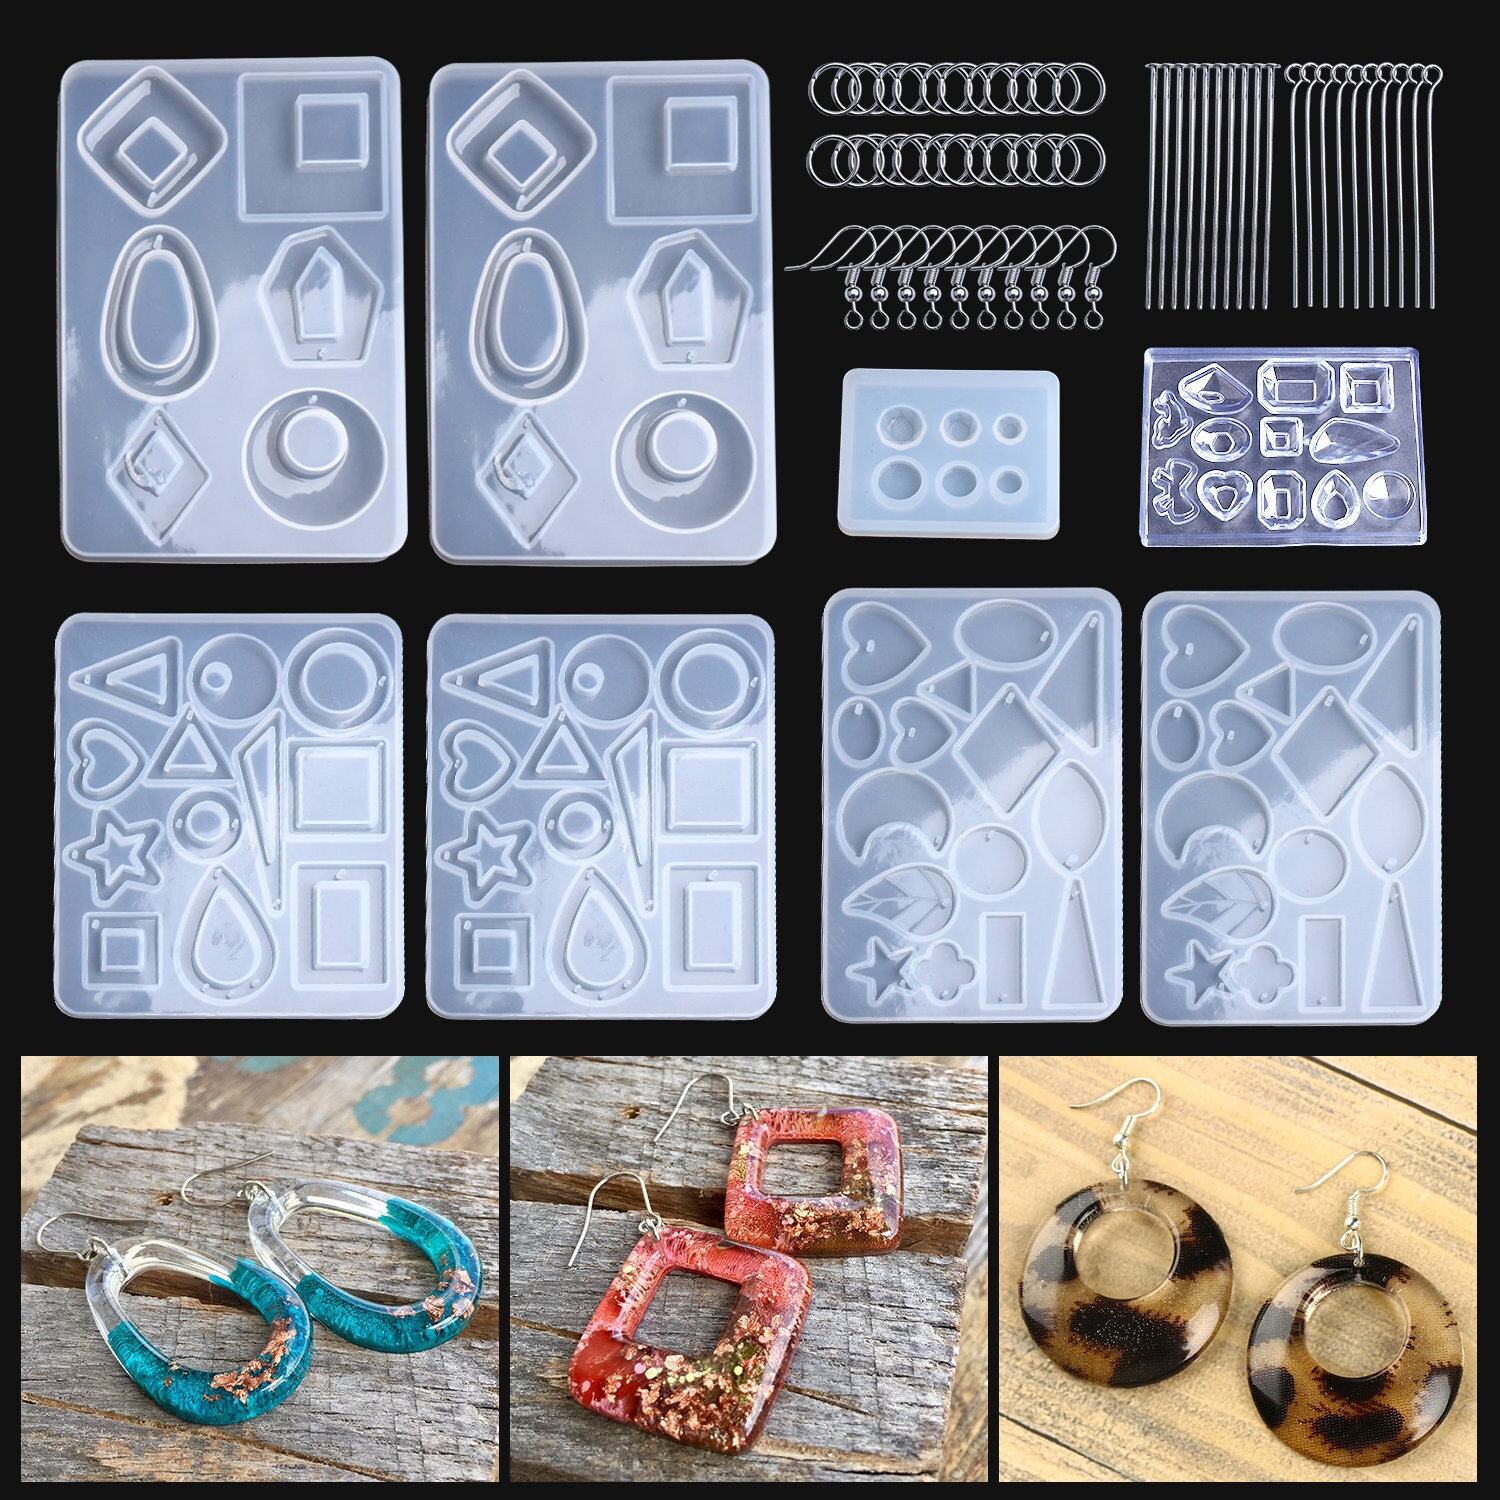  ALEXES Resin Accessories Decoration - Resin Keychain Kit - Resin  Decoration Accessories Kit - Epoxy Resin Jewelry Making Supplies - Resin  Earring Molds Silicone Jewelry Making Kit